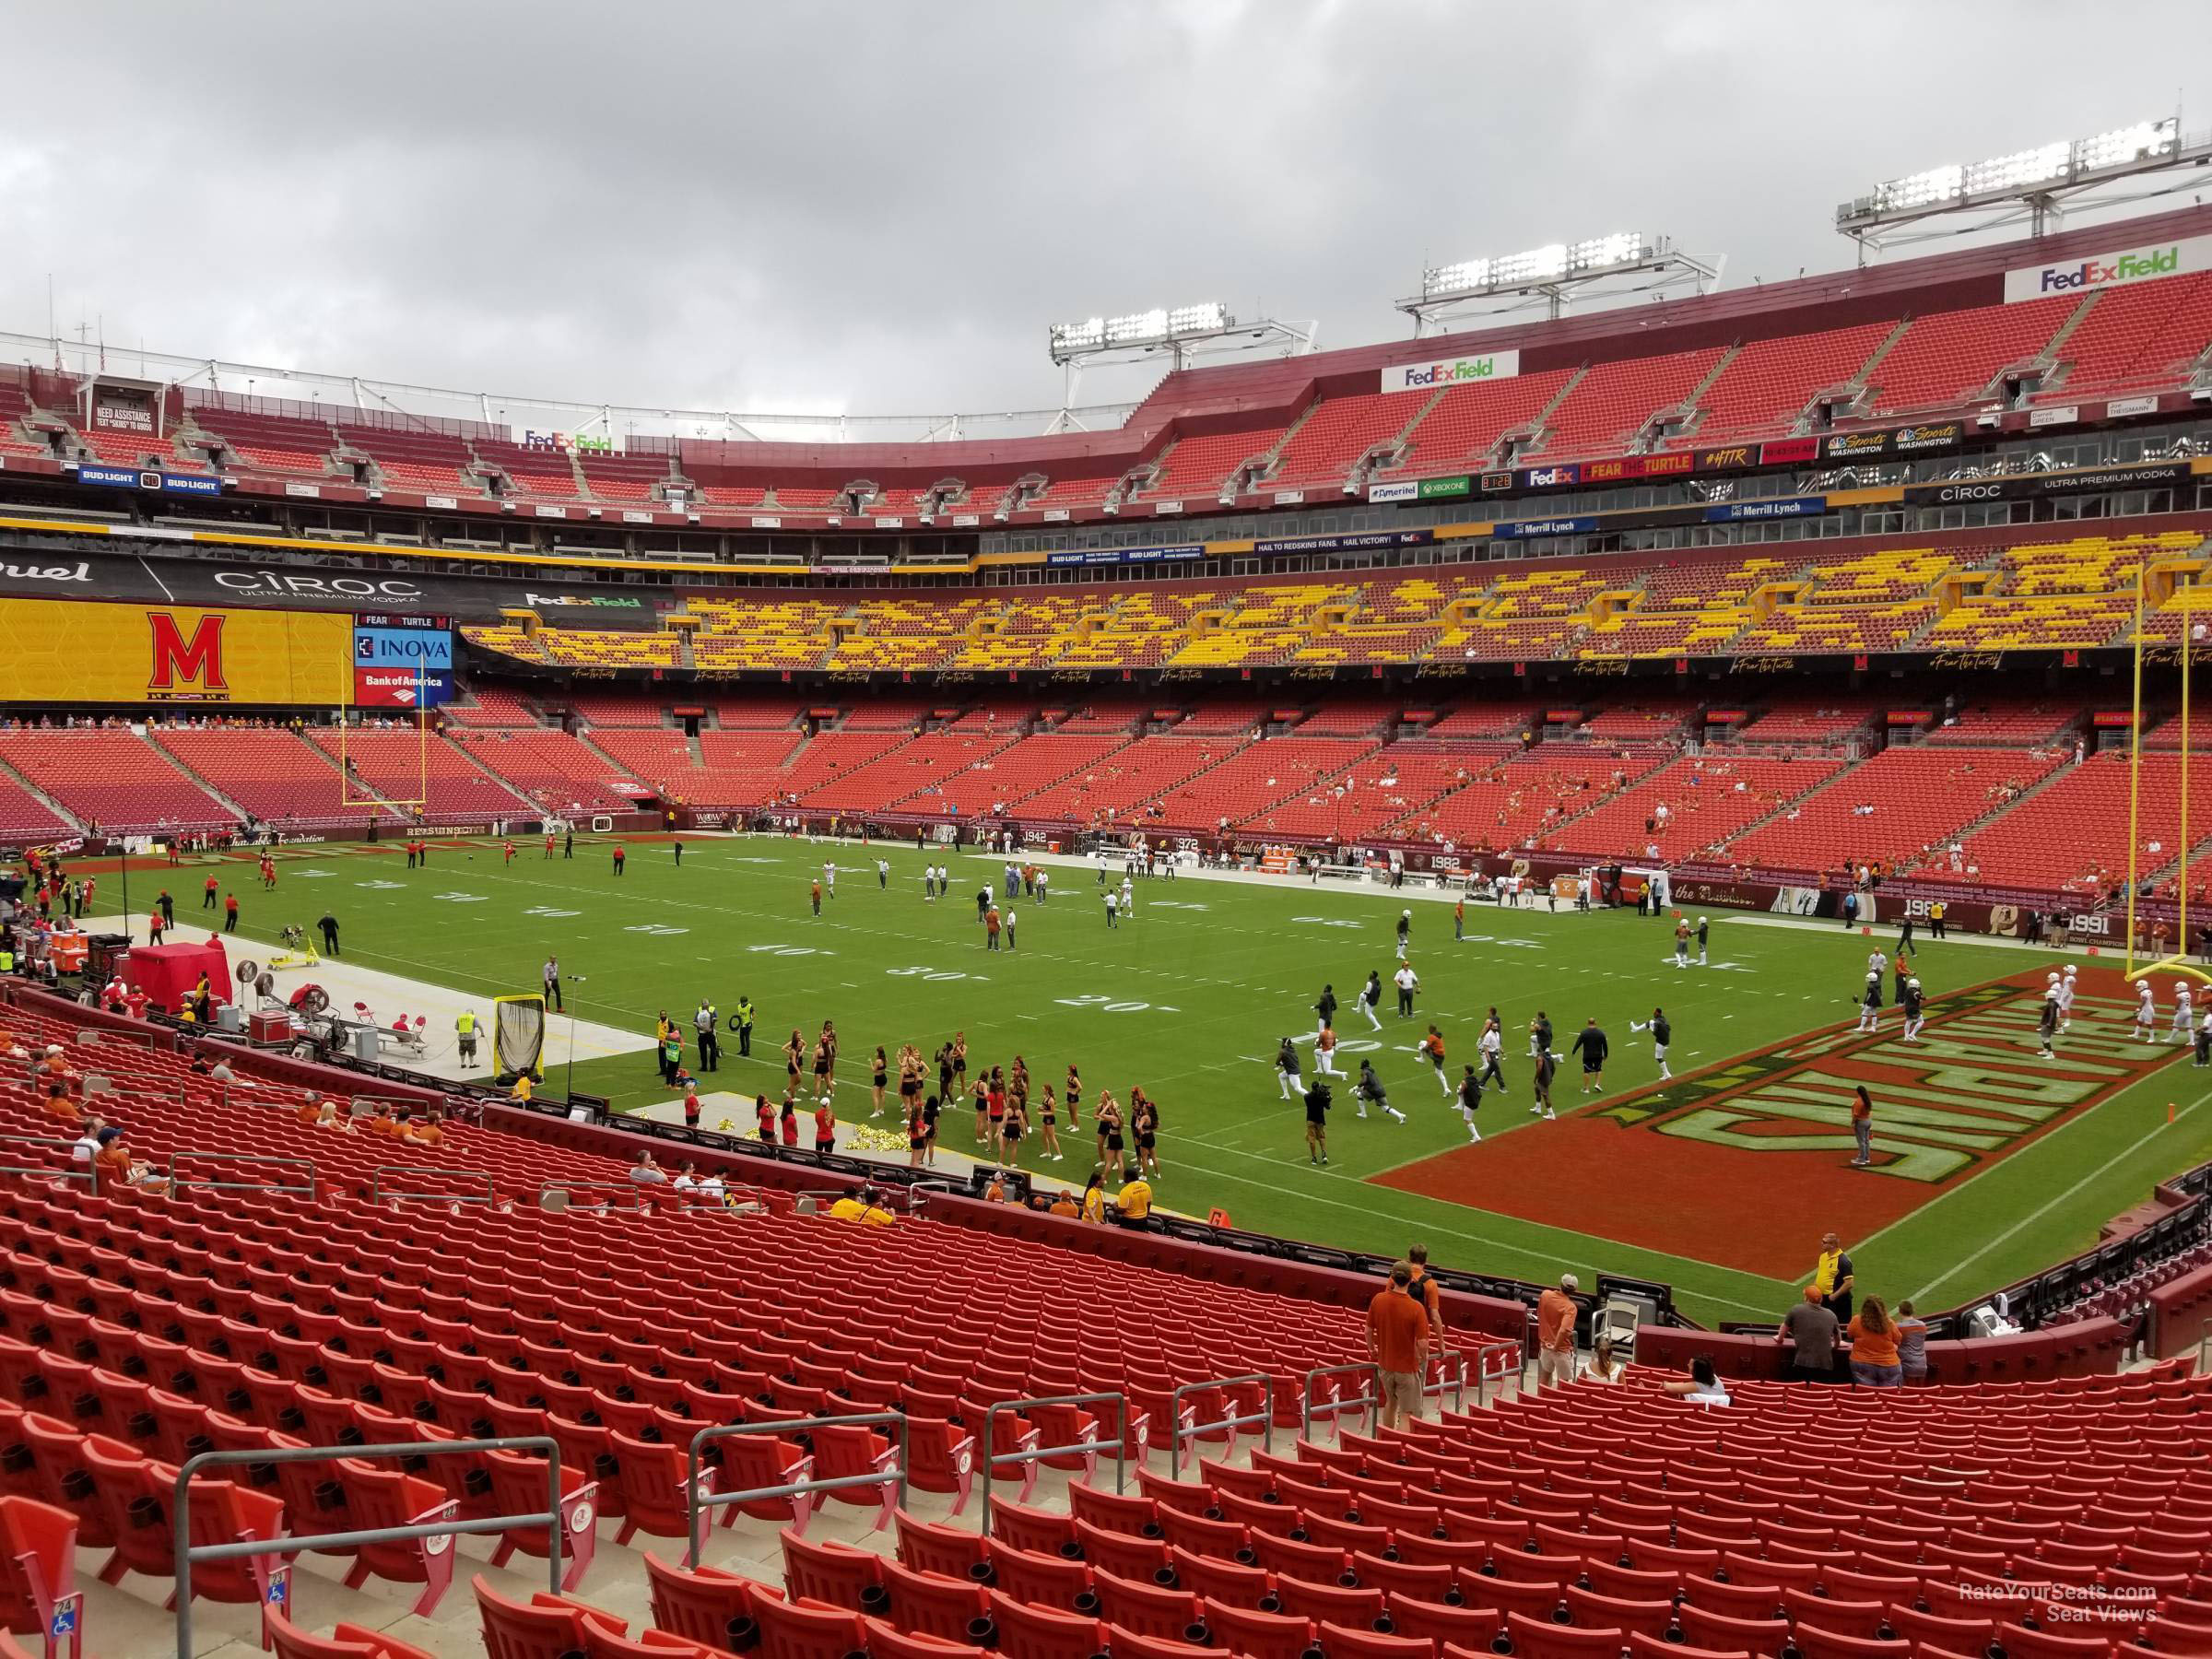 section 237, row 1 seat view  - fedexfield